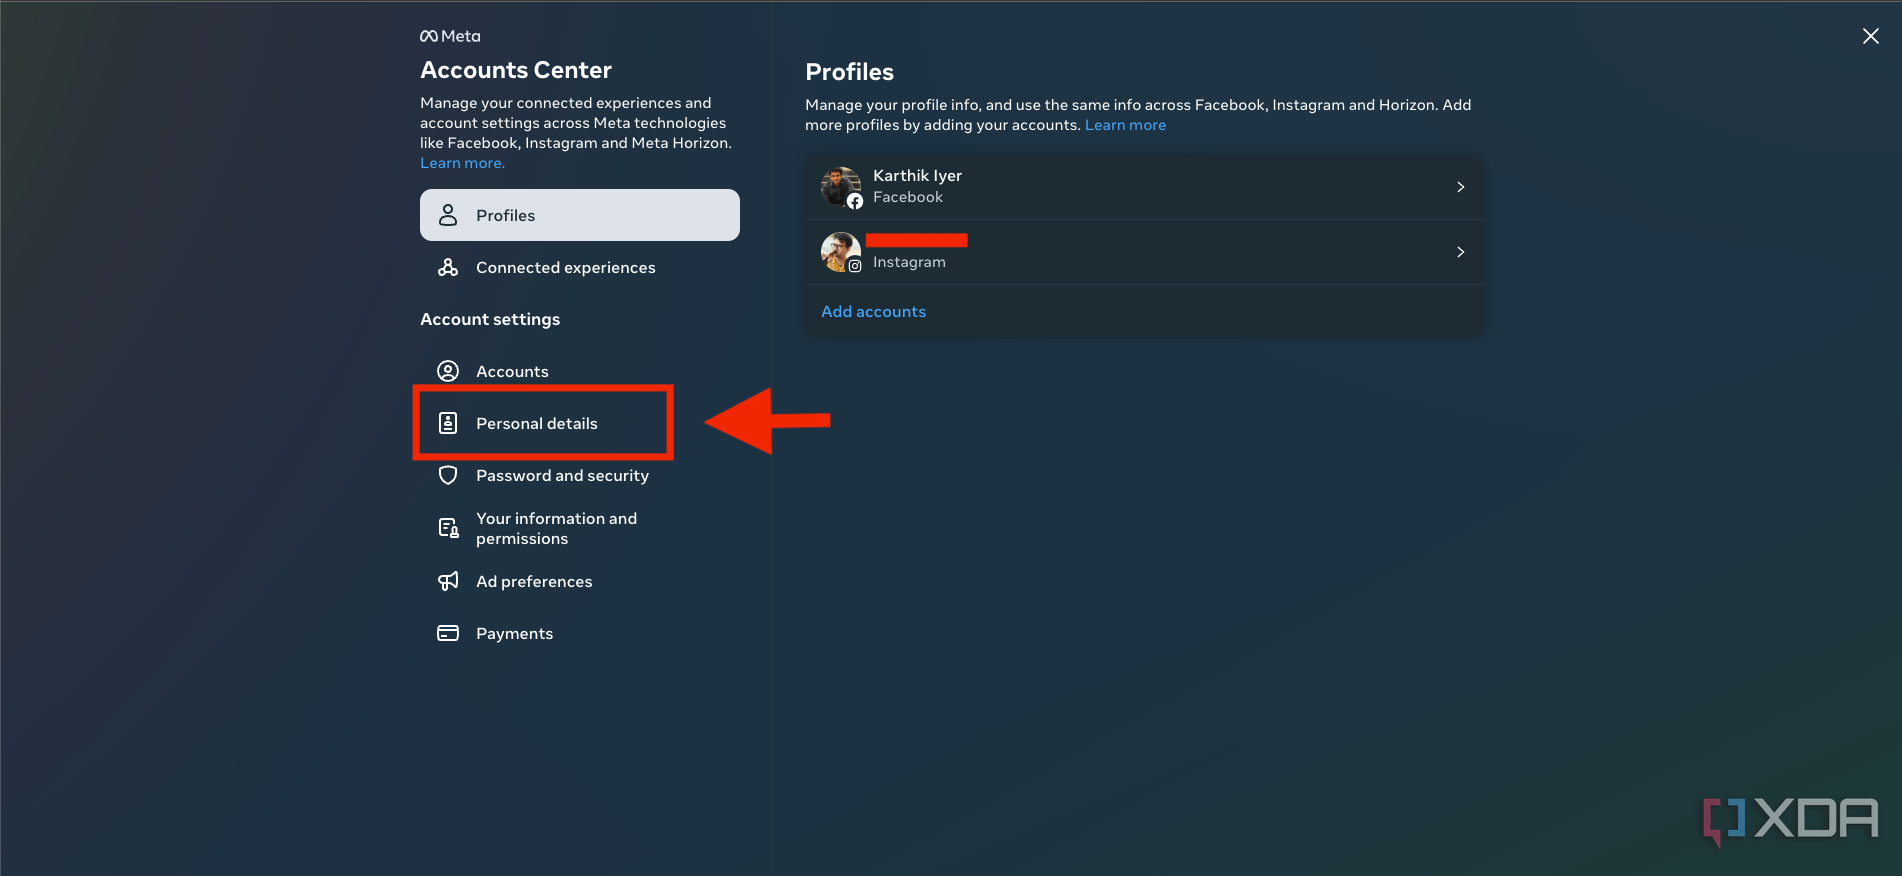 A screenshot showing the accounts center page in Facebook.